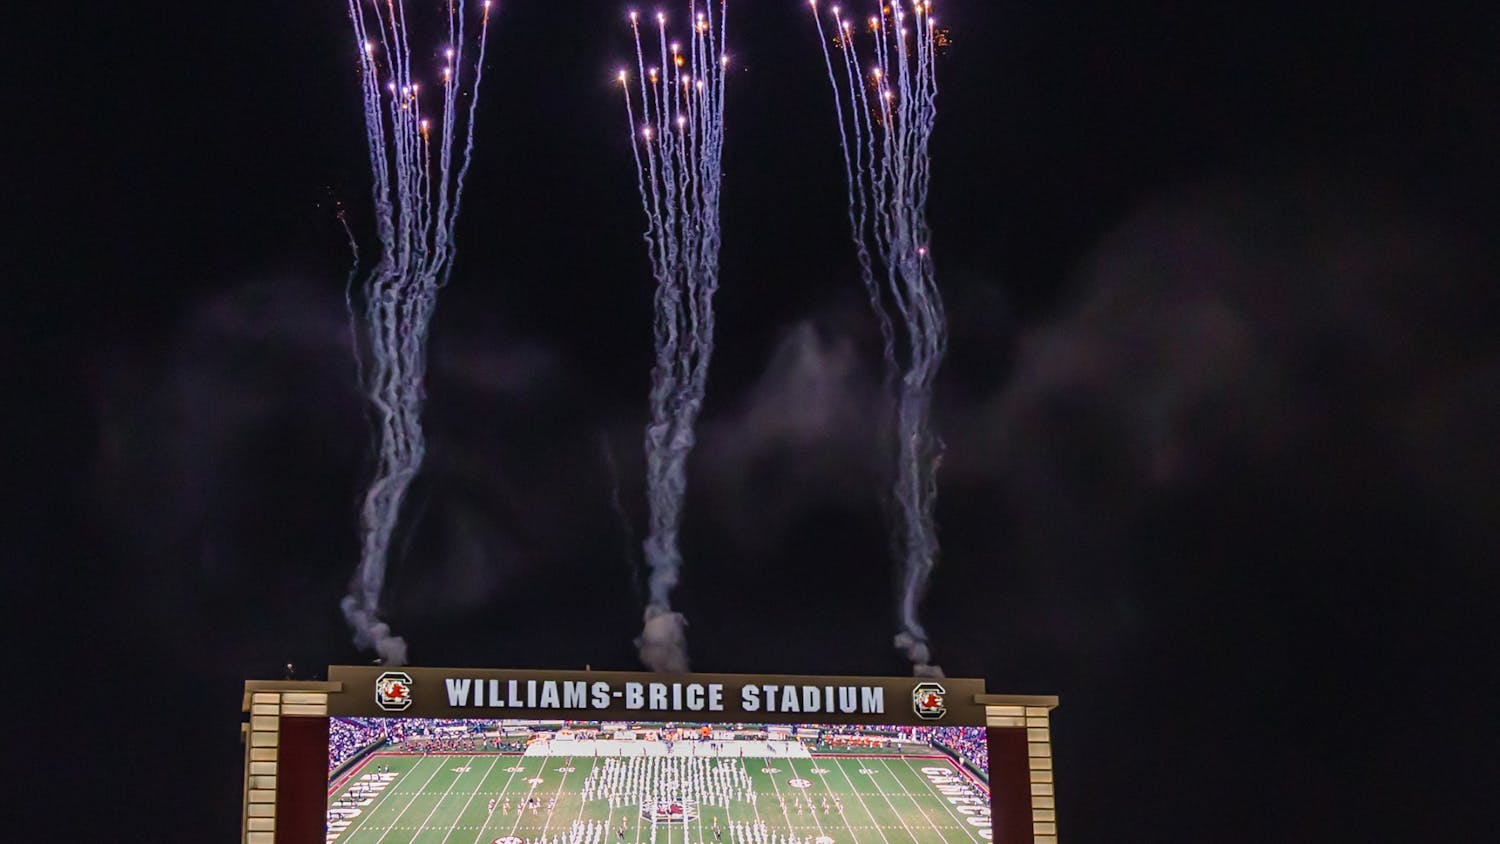 Fireworks go off at the Williams Brice Stadium as the Gamecock players enter the field to play against the Clemson Tigers on November 27, 2021. 